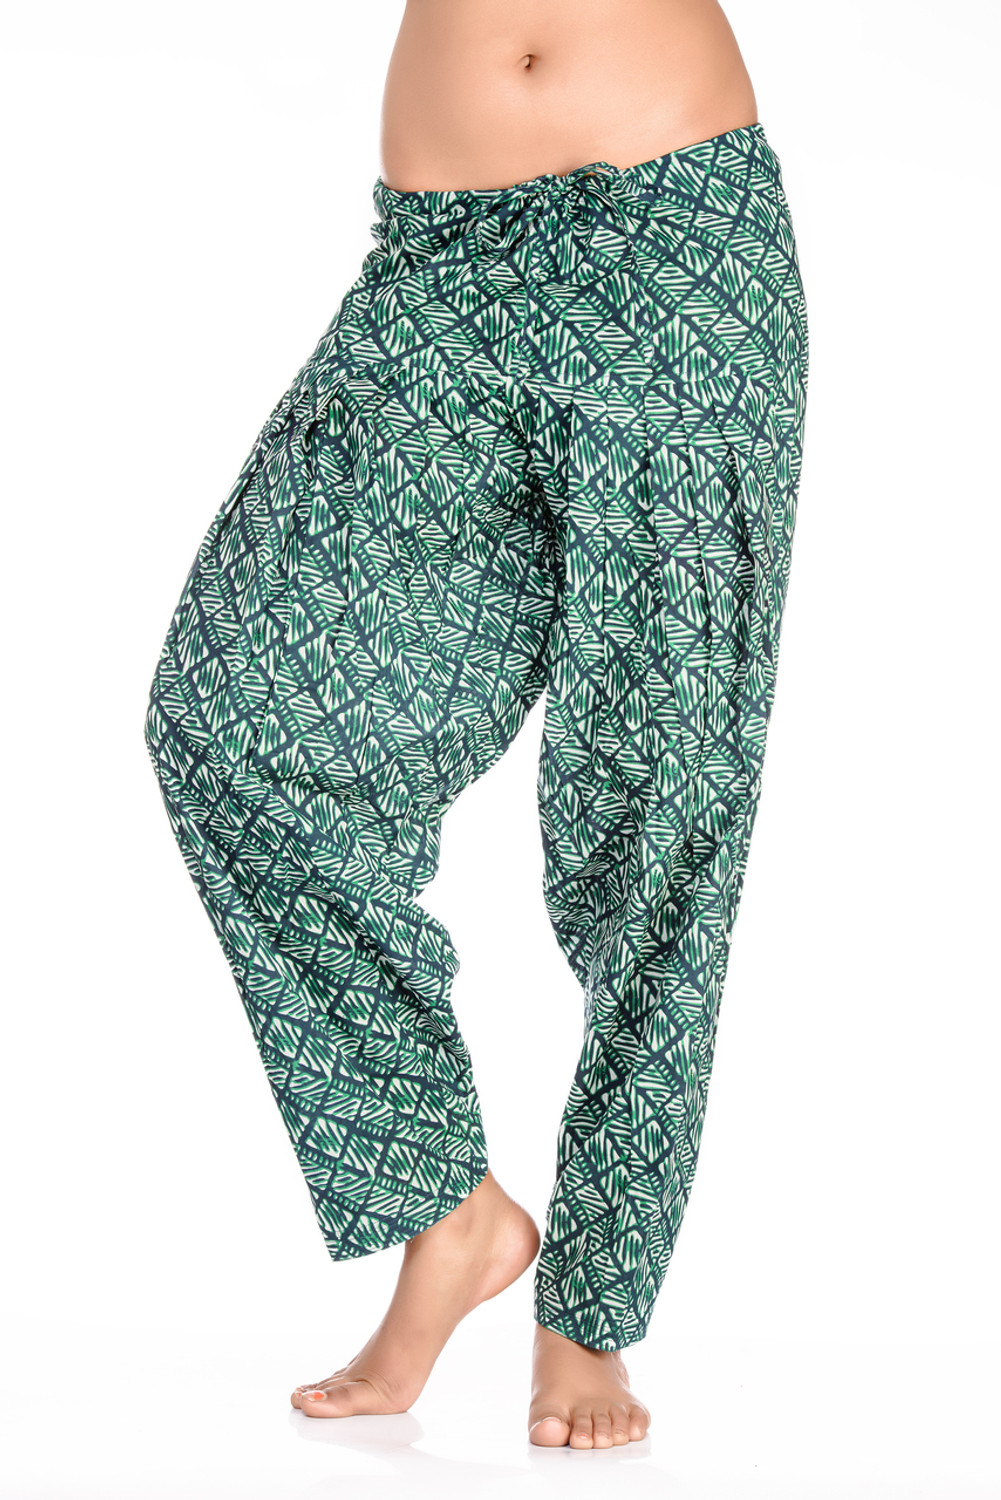 In-Sattva Women's Indian Peacock Feather Print Harem Pants - In-Sattva